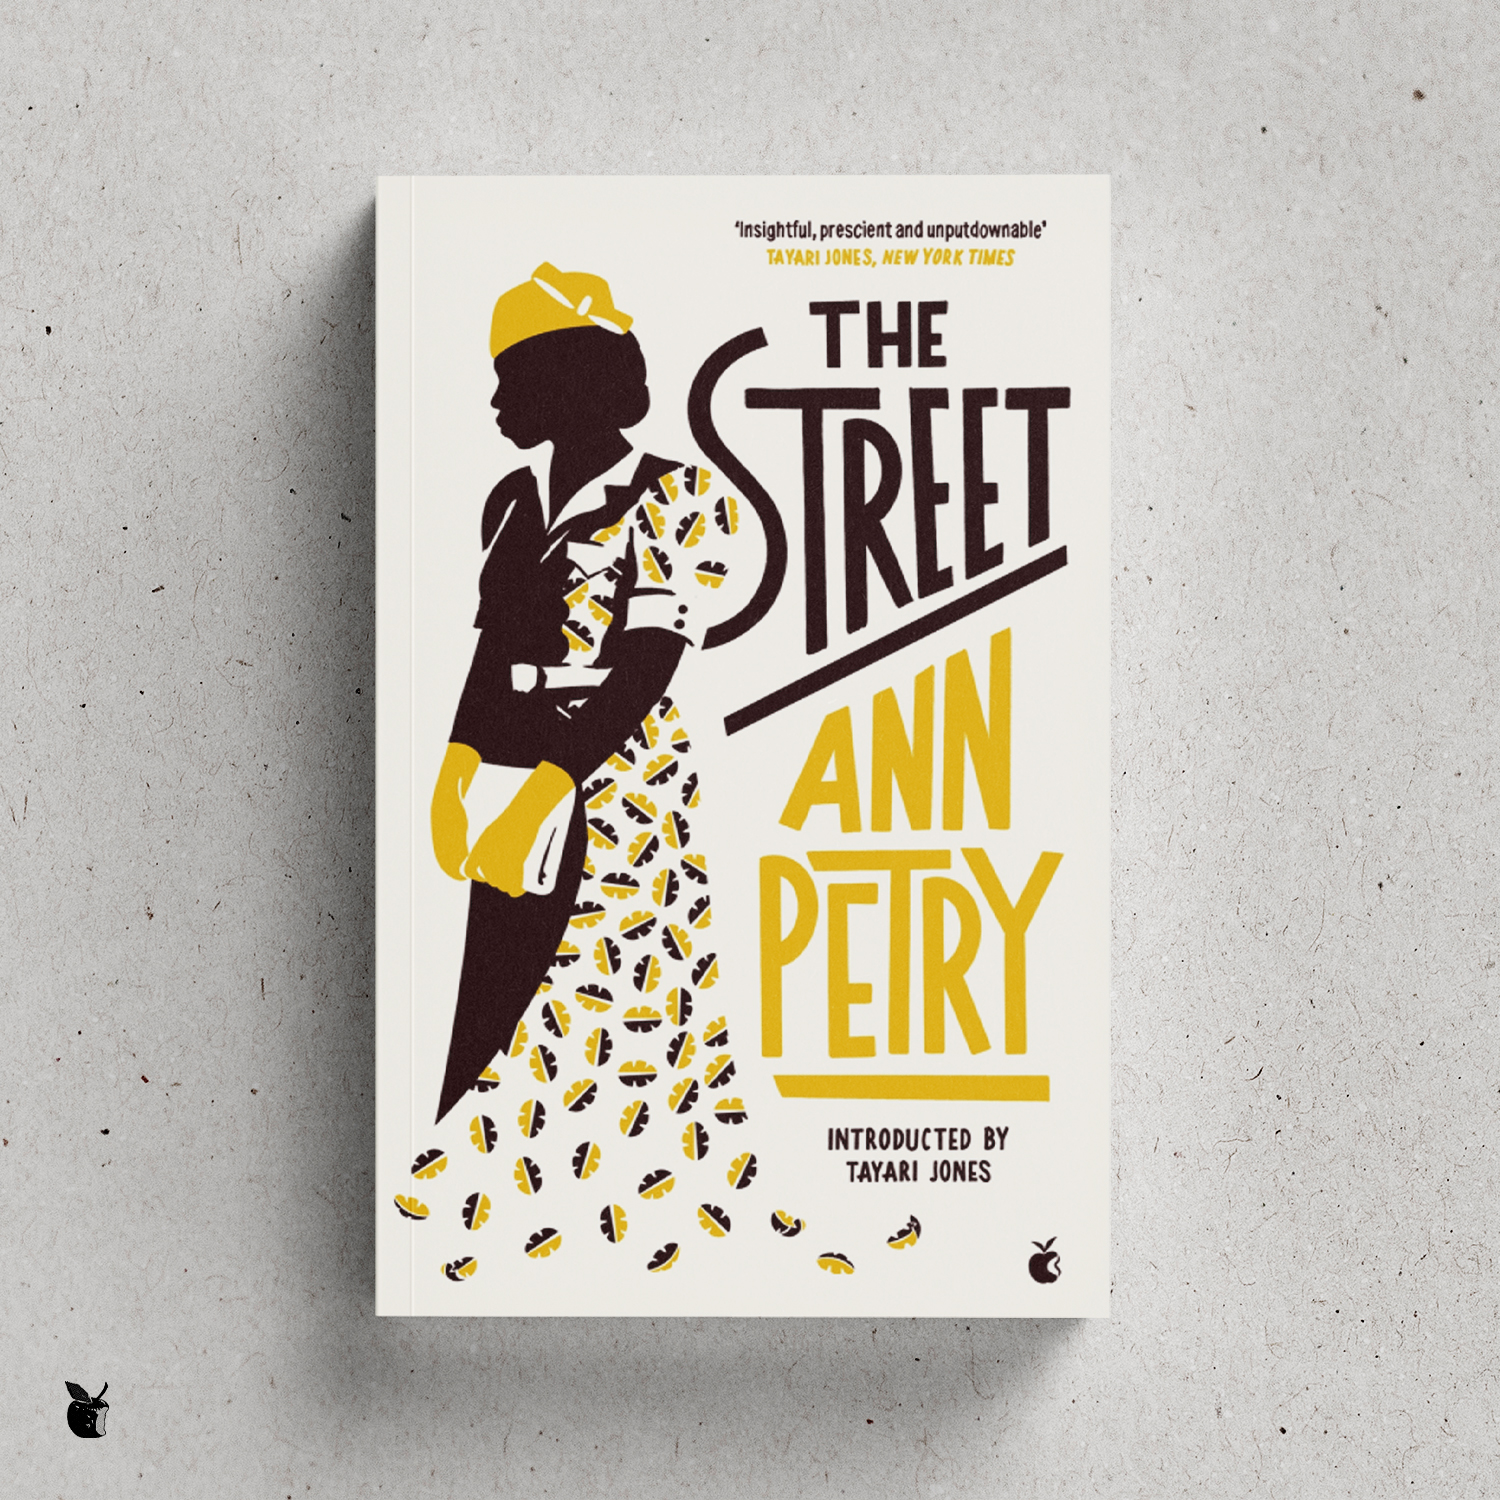 The Street by Ann Petry